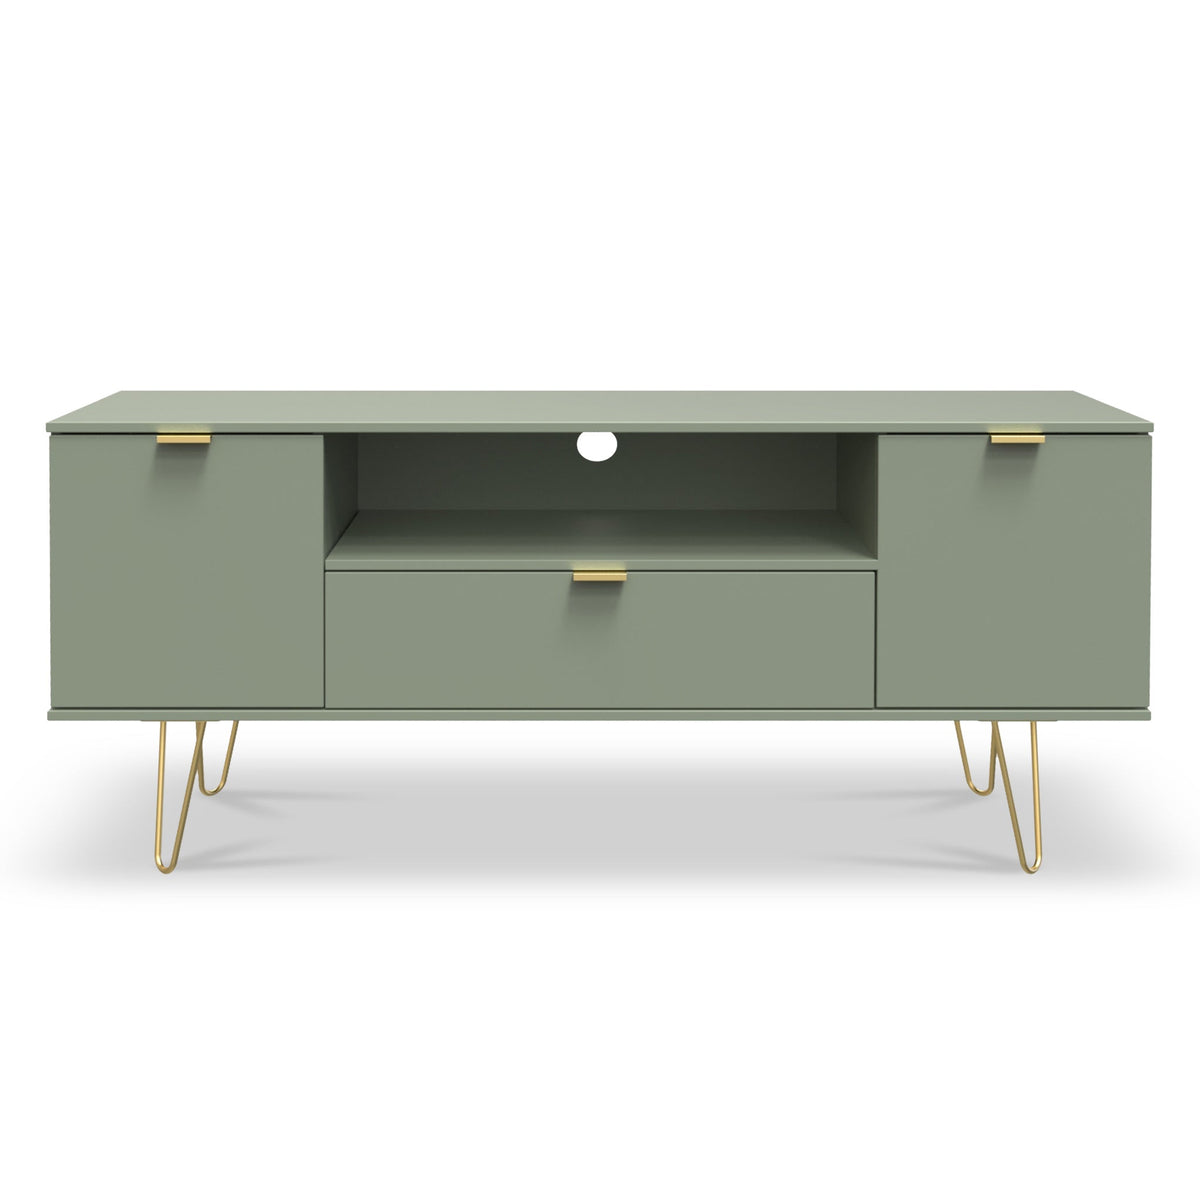 Moreno Olive Green 2 Door 1 Drawer Large TV Unit with Gold Hairpin Legs from Roseland Furniture